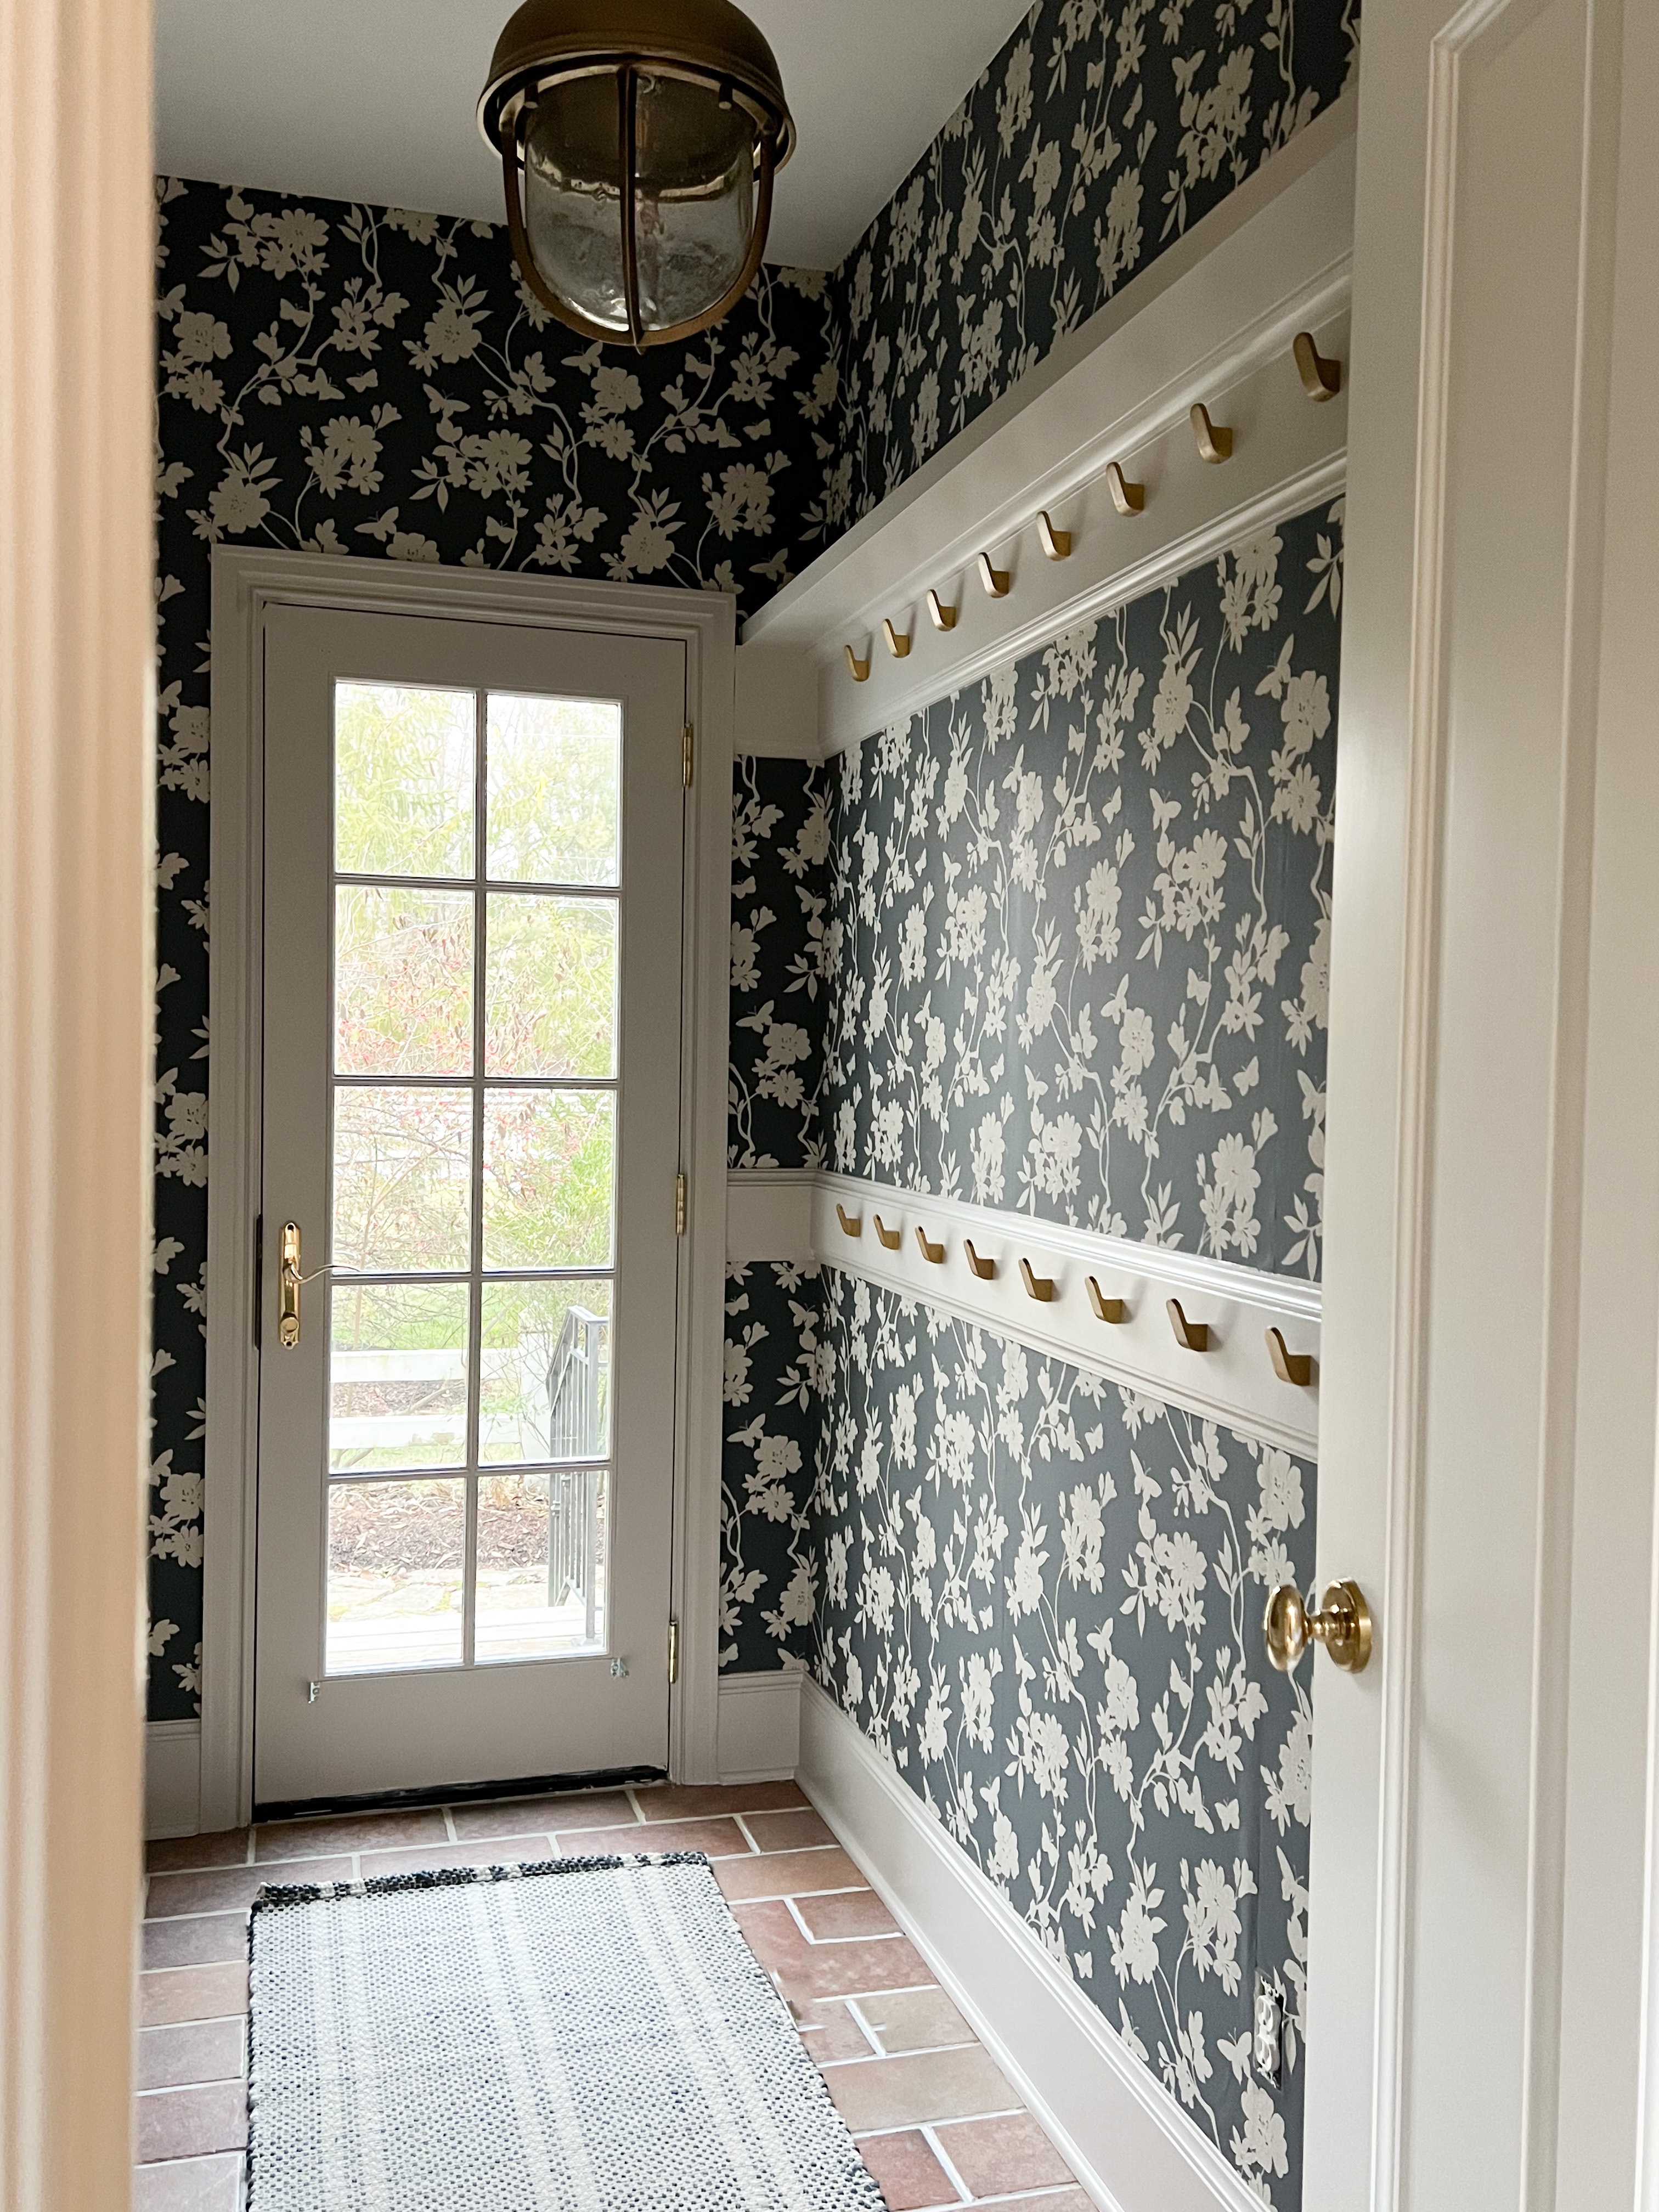 Completed Mudroom Makeover with fresh paint and wallpaper install.